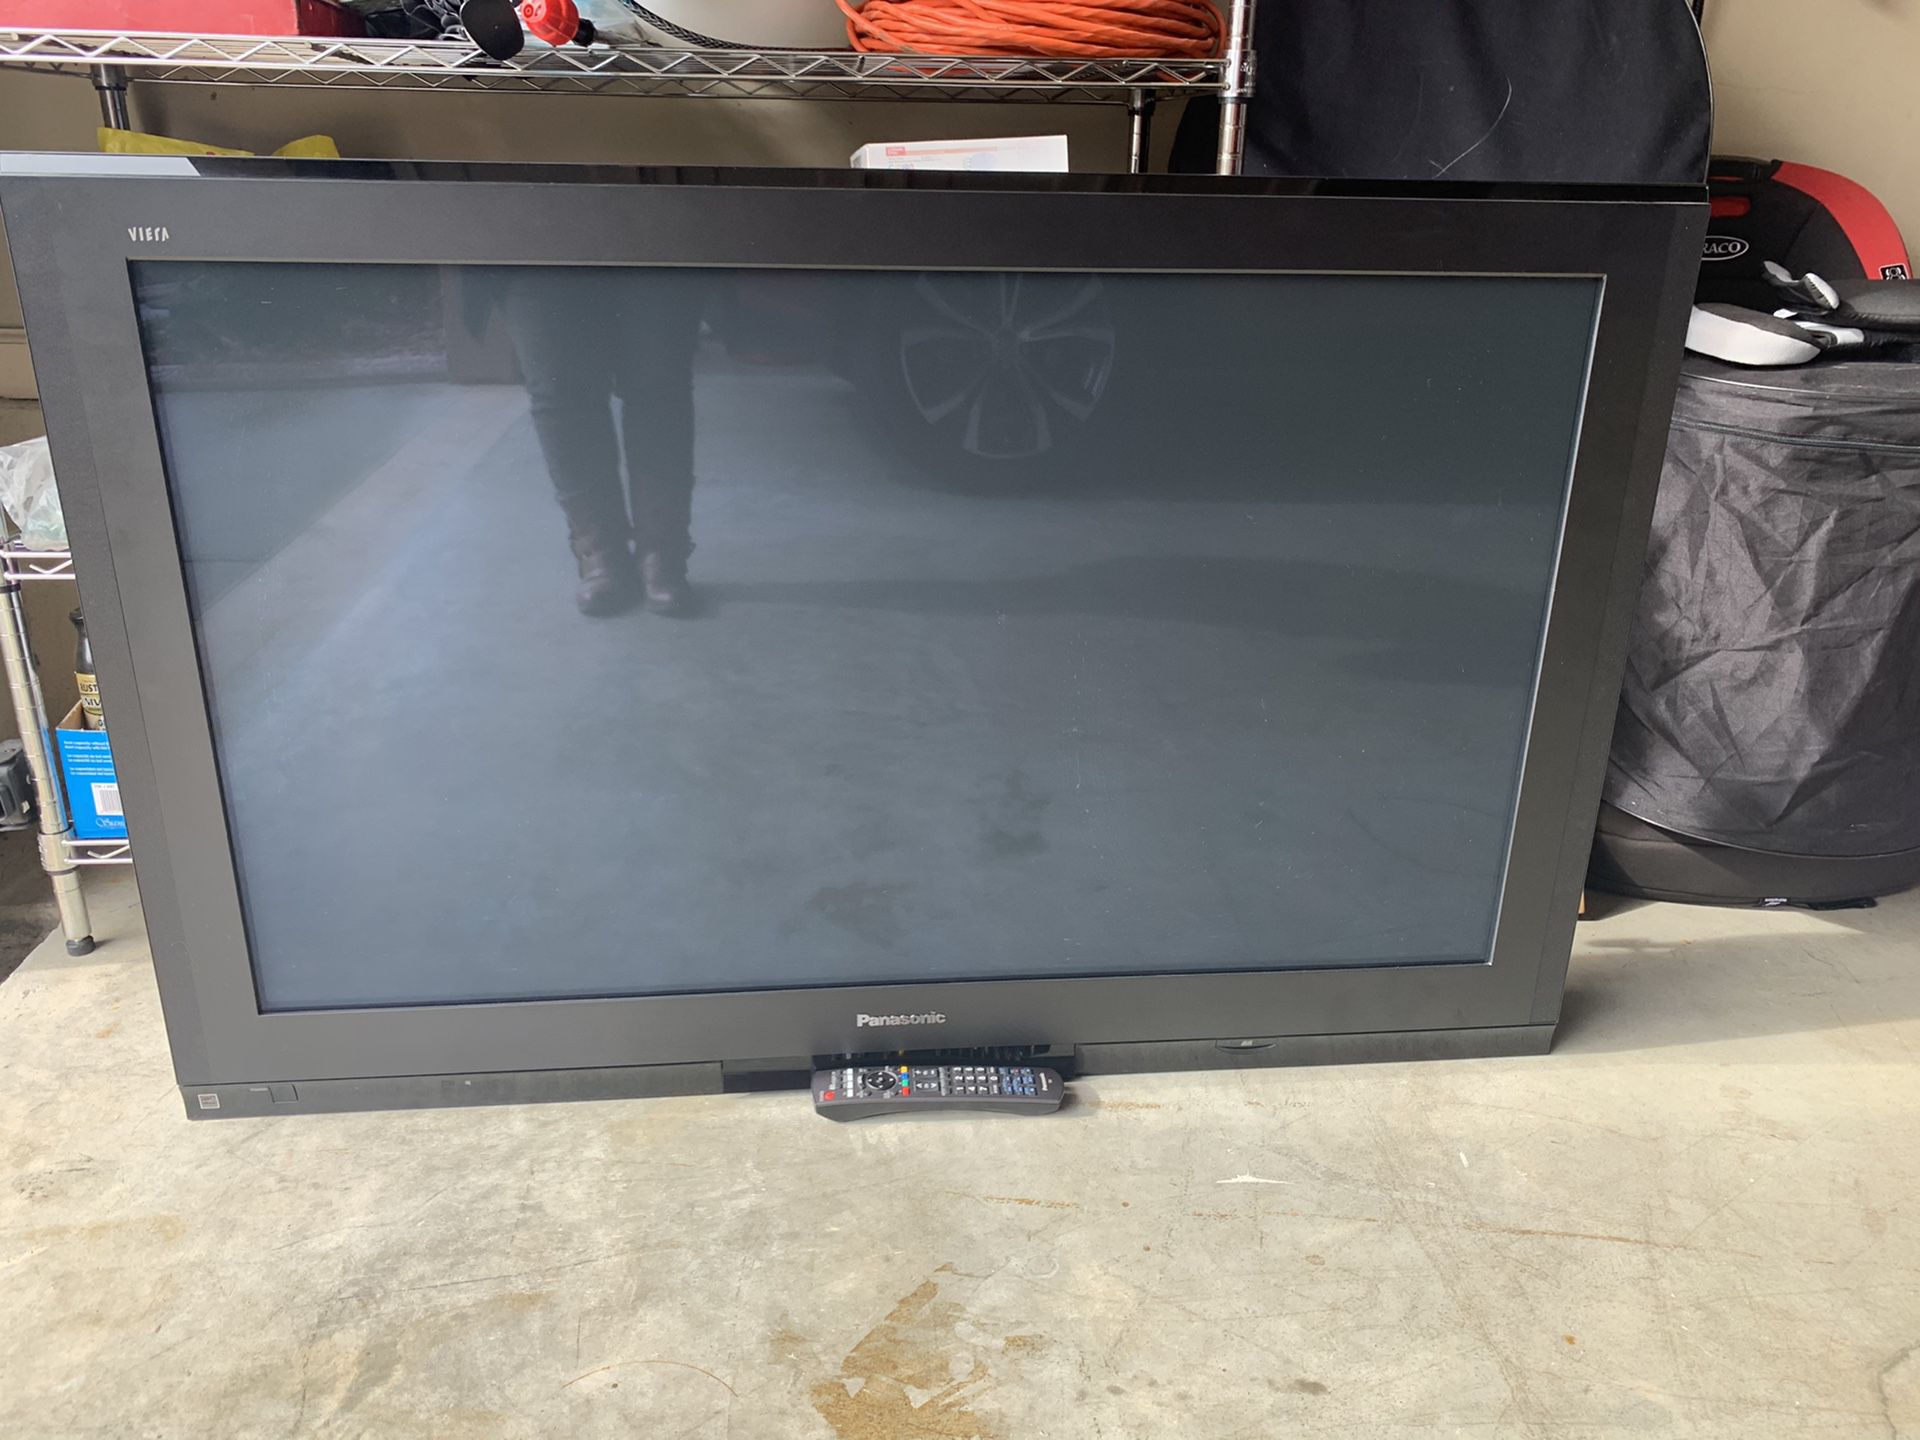 Panasonic 55” TV with remote. Works great!